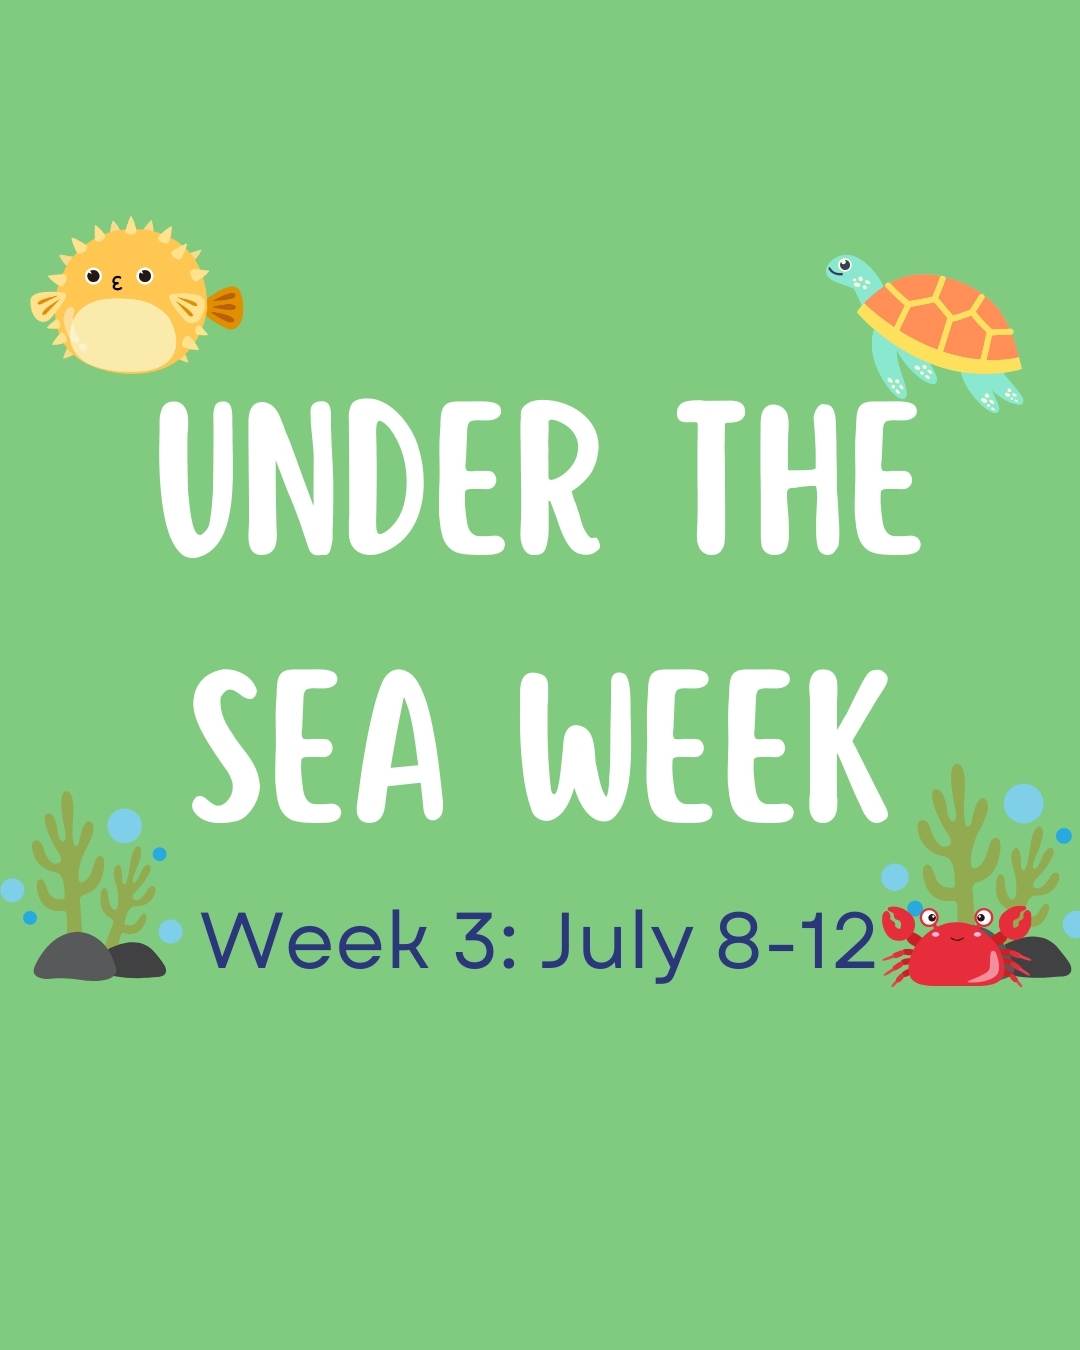 UNDER THE SEA: This week includes all things related to WATER!!

There will be a slip'n'slide, discovery tables full of duckies and toys for all ages.